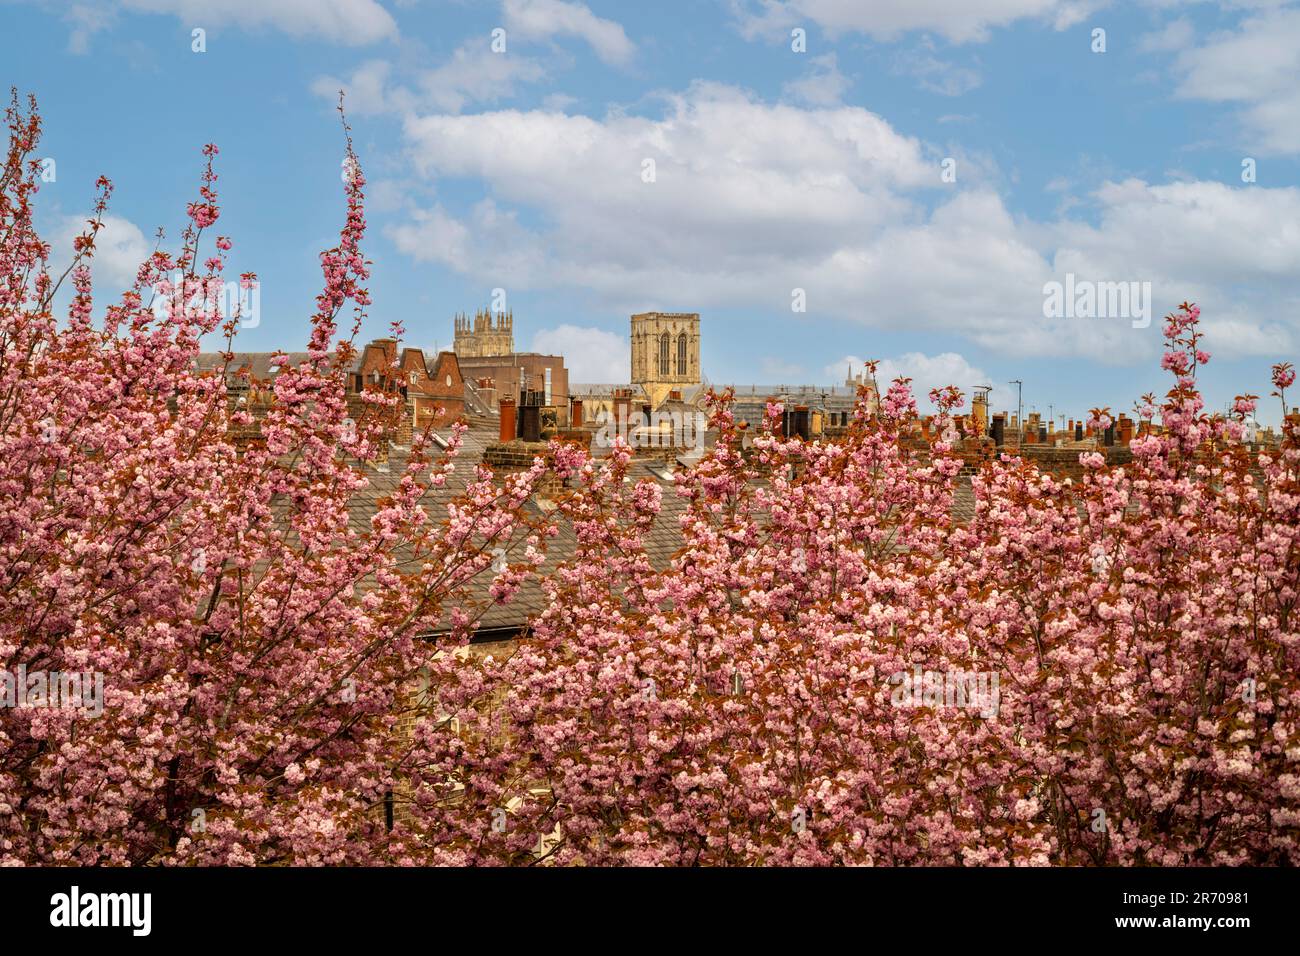 Elevated shot of cherry trees bearing pink blossom with York Minster in the distance. Seen against a blue sky on a sunny spring day in York. UK Stock Photo